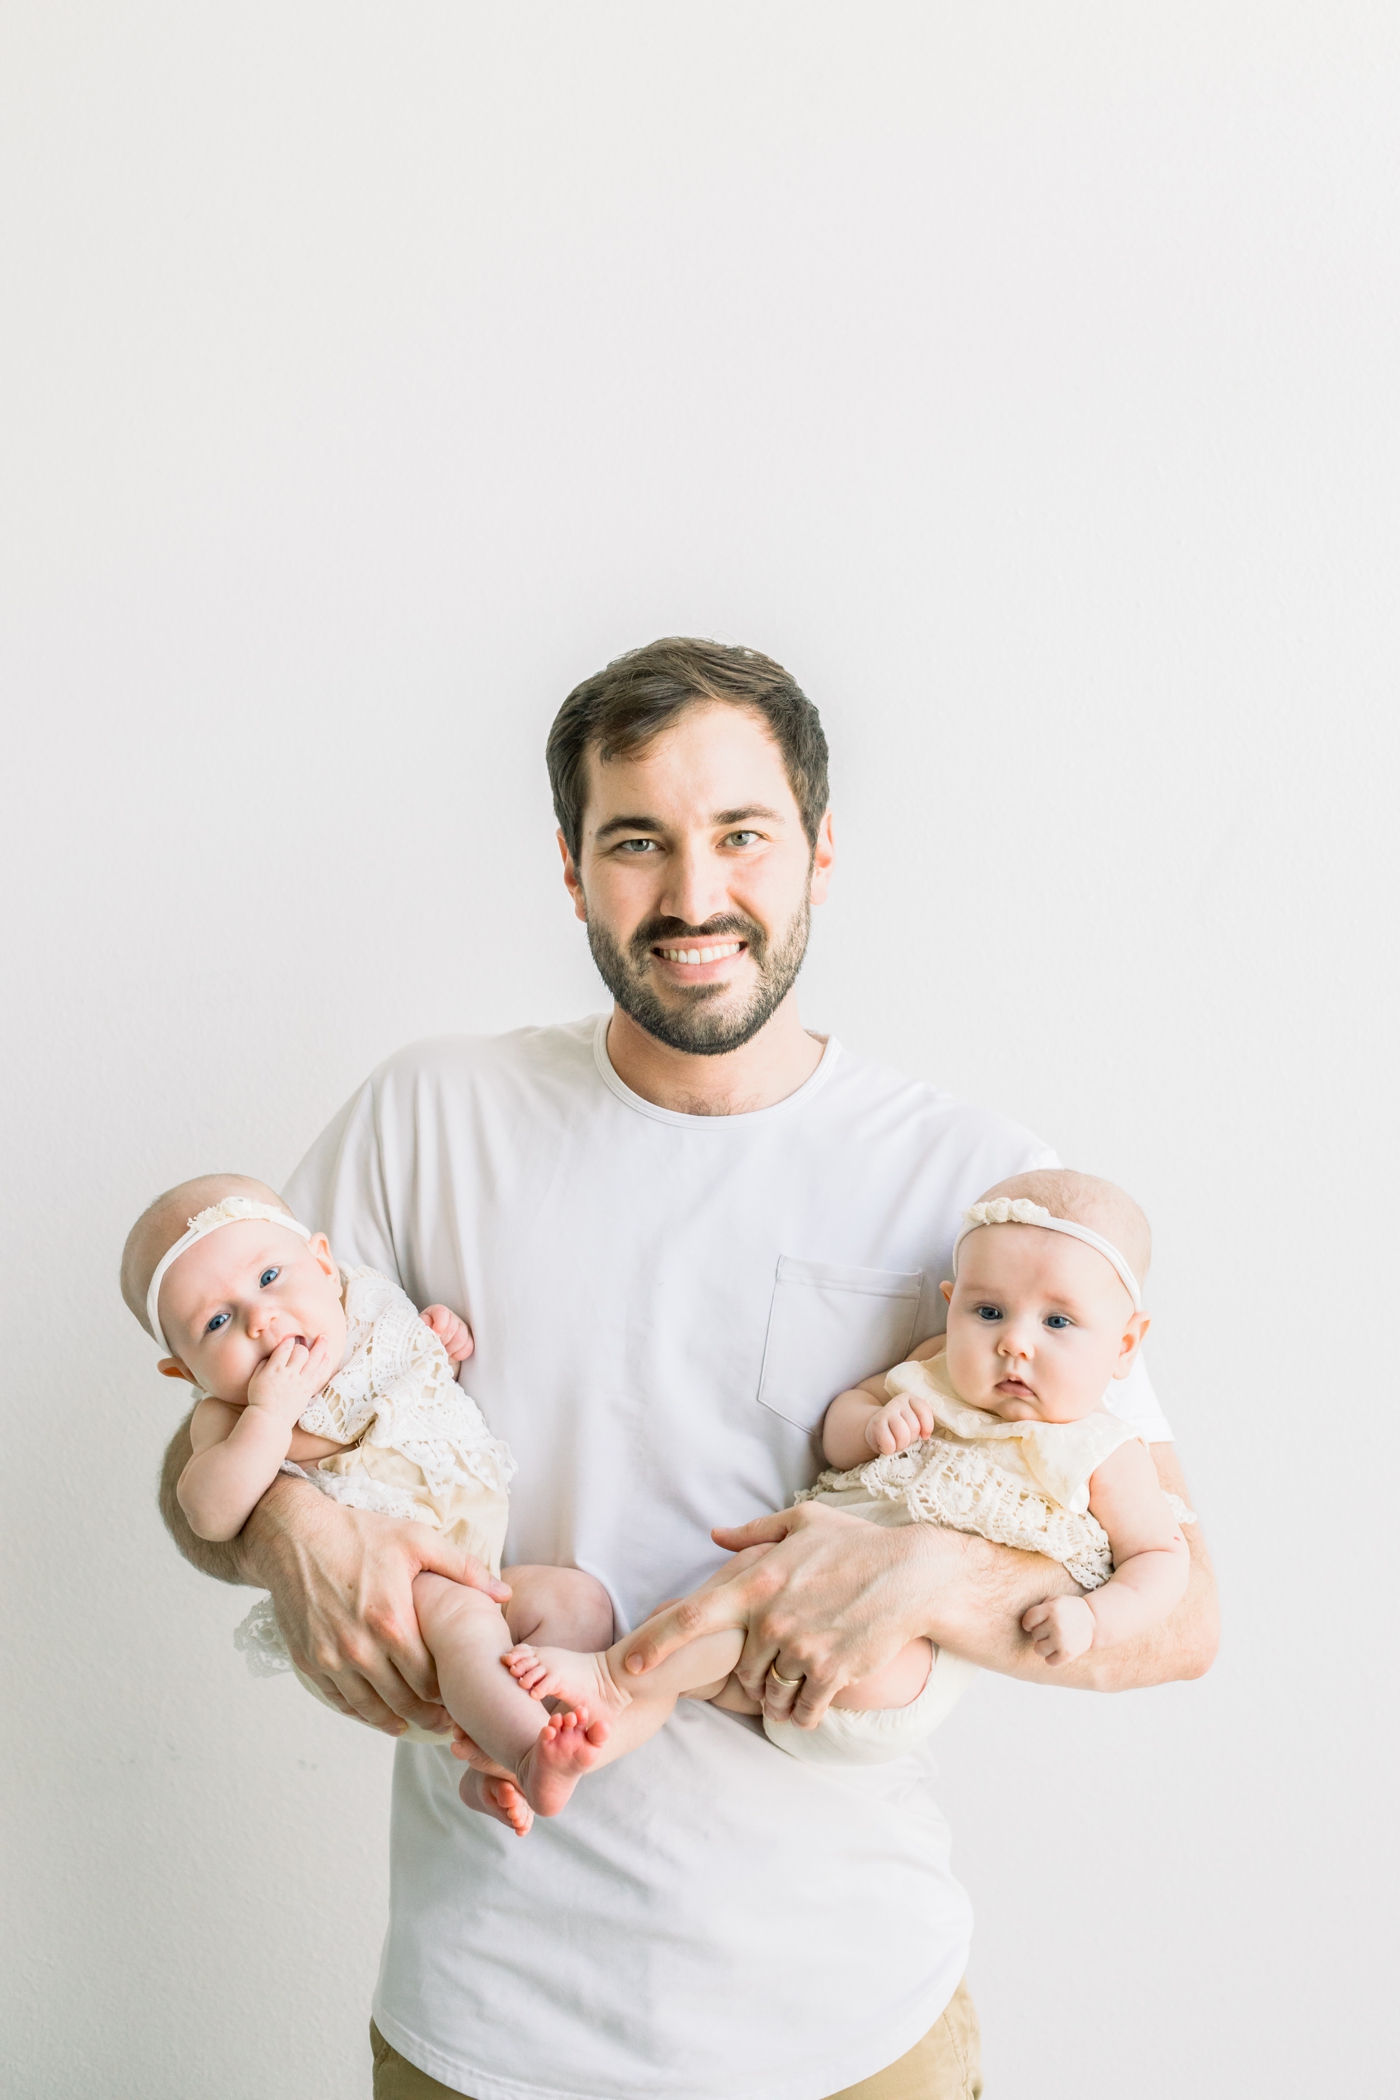 Dad holding twin daughters and smiling at camera. Photo by Sana Ahmed Photography.